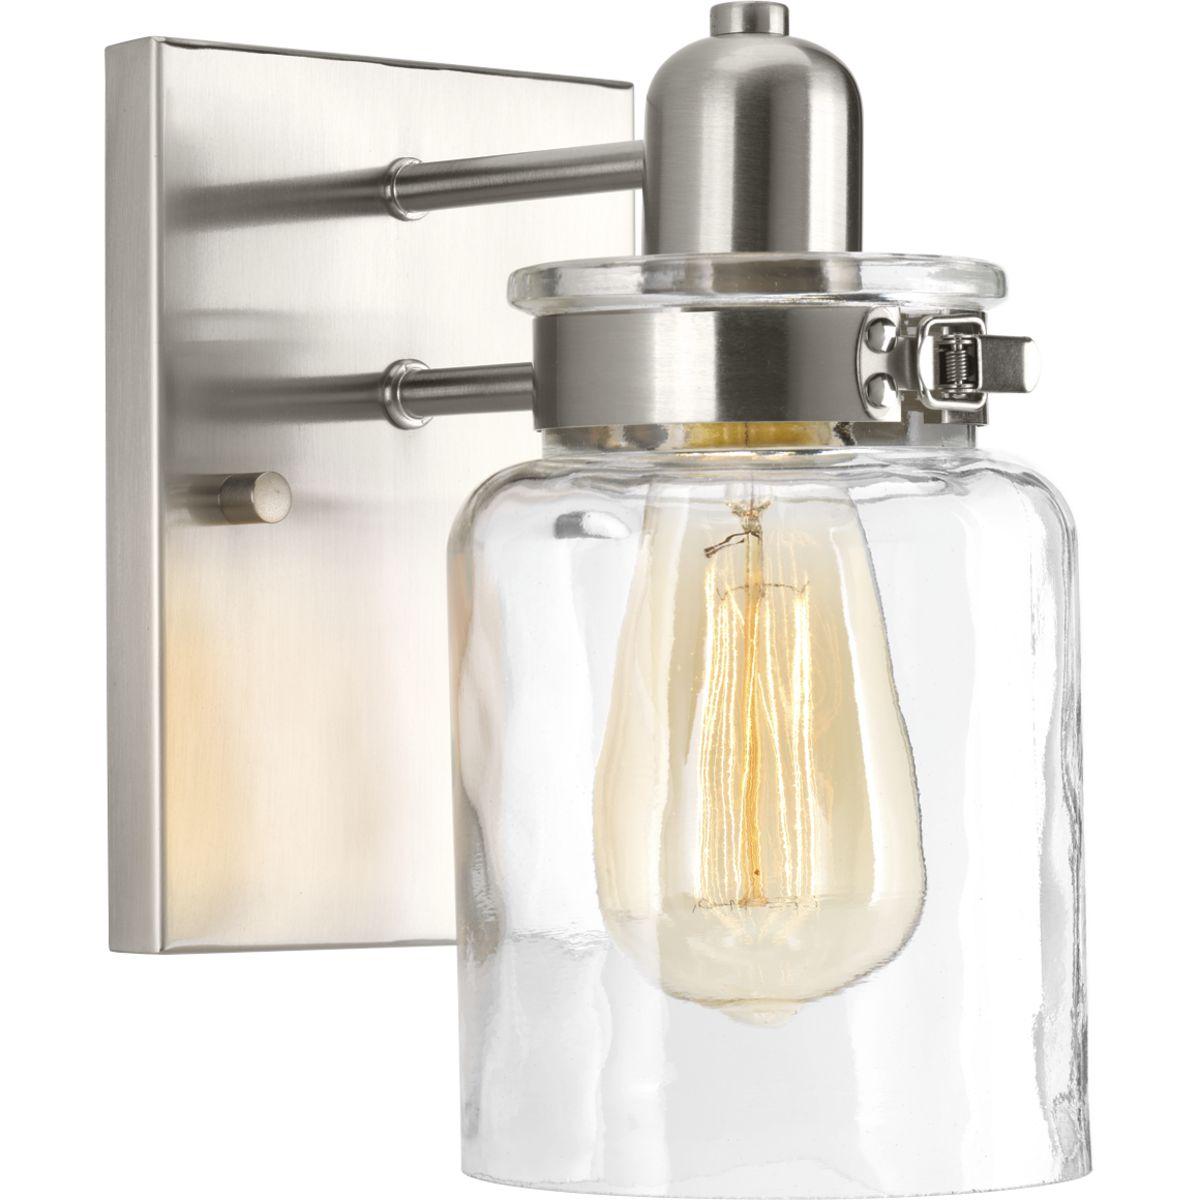 Hubbell P300045-009 A delightful trend in home decor is the repurposing of antique parts into new, functional furniture and accessories. The Calhoun Collection playfully follows this lead with an apothecary style and features a clear glass diffuser held in place with a mecha